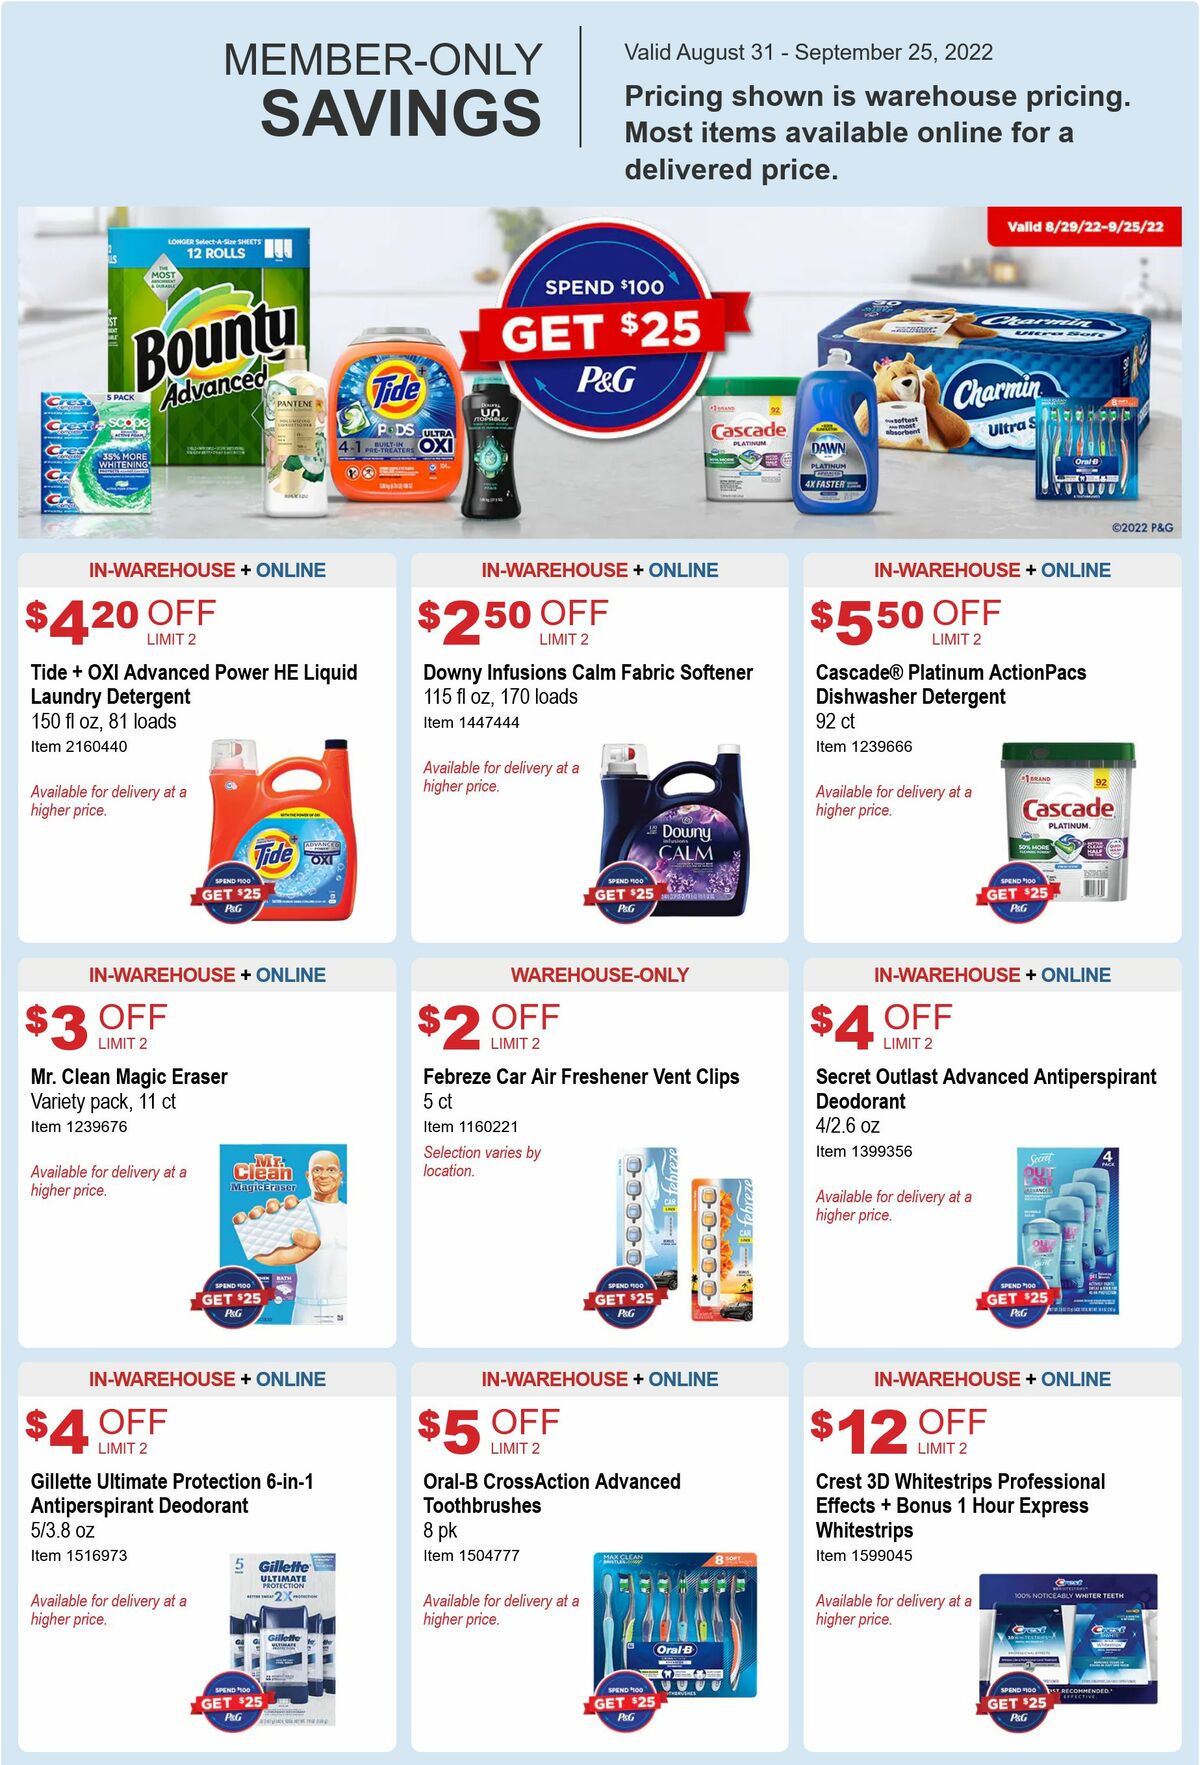 Costco Special Buys and Warehouse Savings from August 31